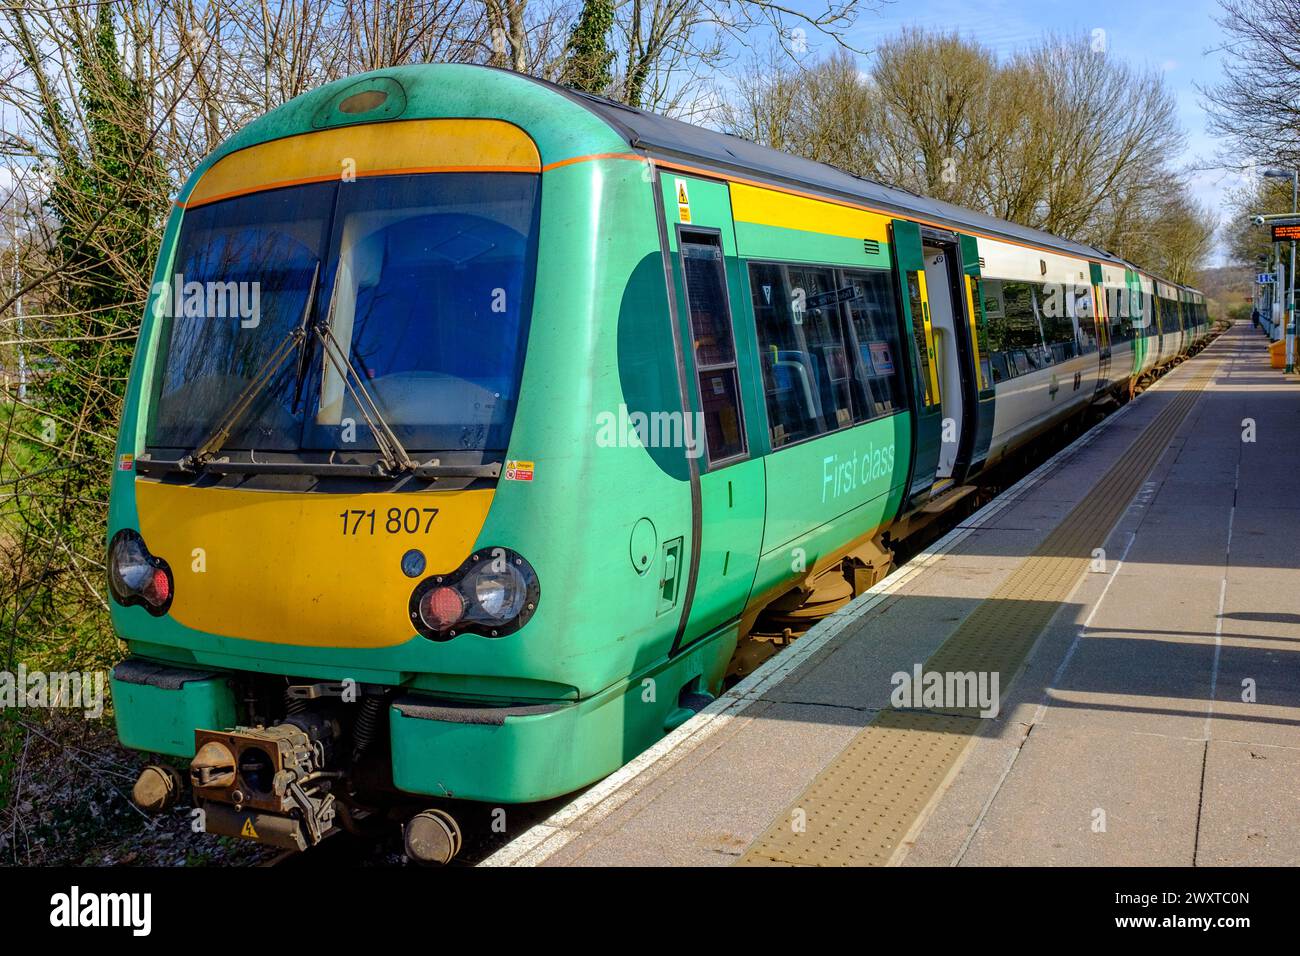 A Southern Railway train in green and yellow livery stands with its doors open at an empty station platform Stock Photo